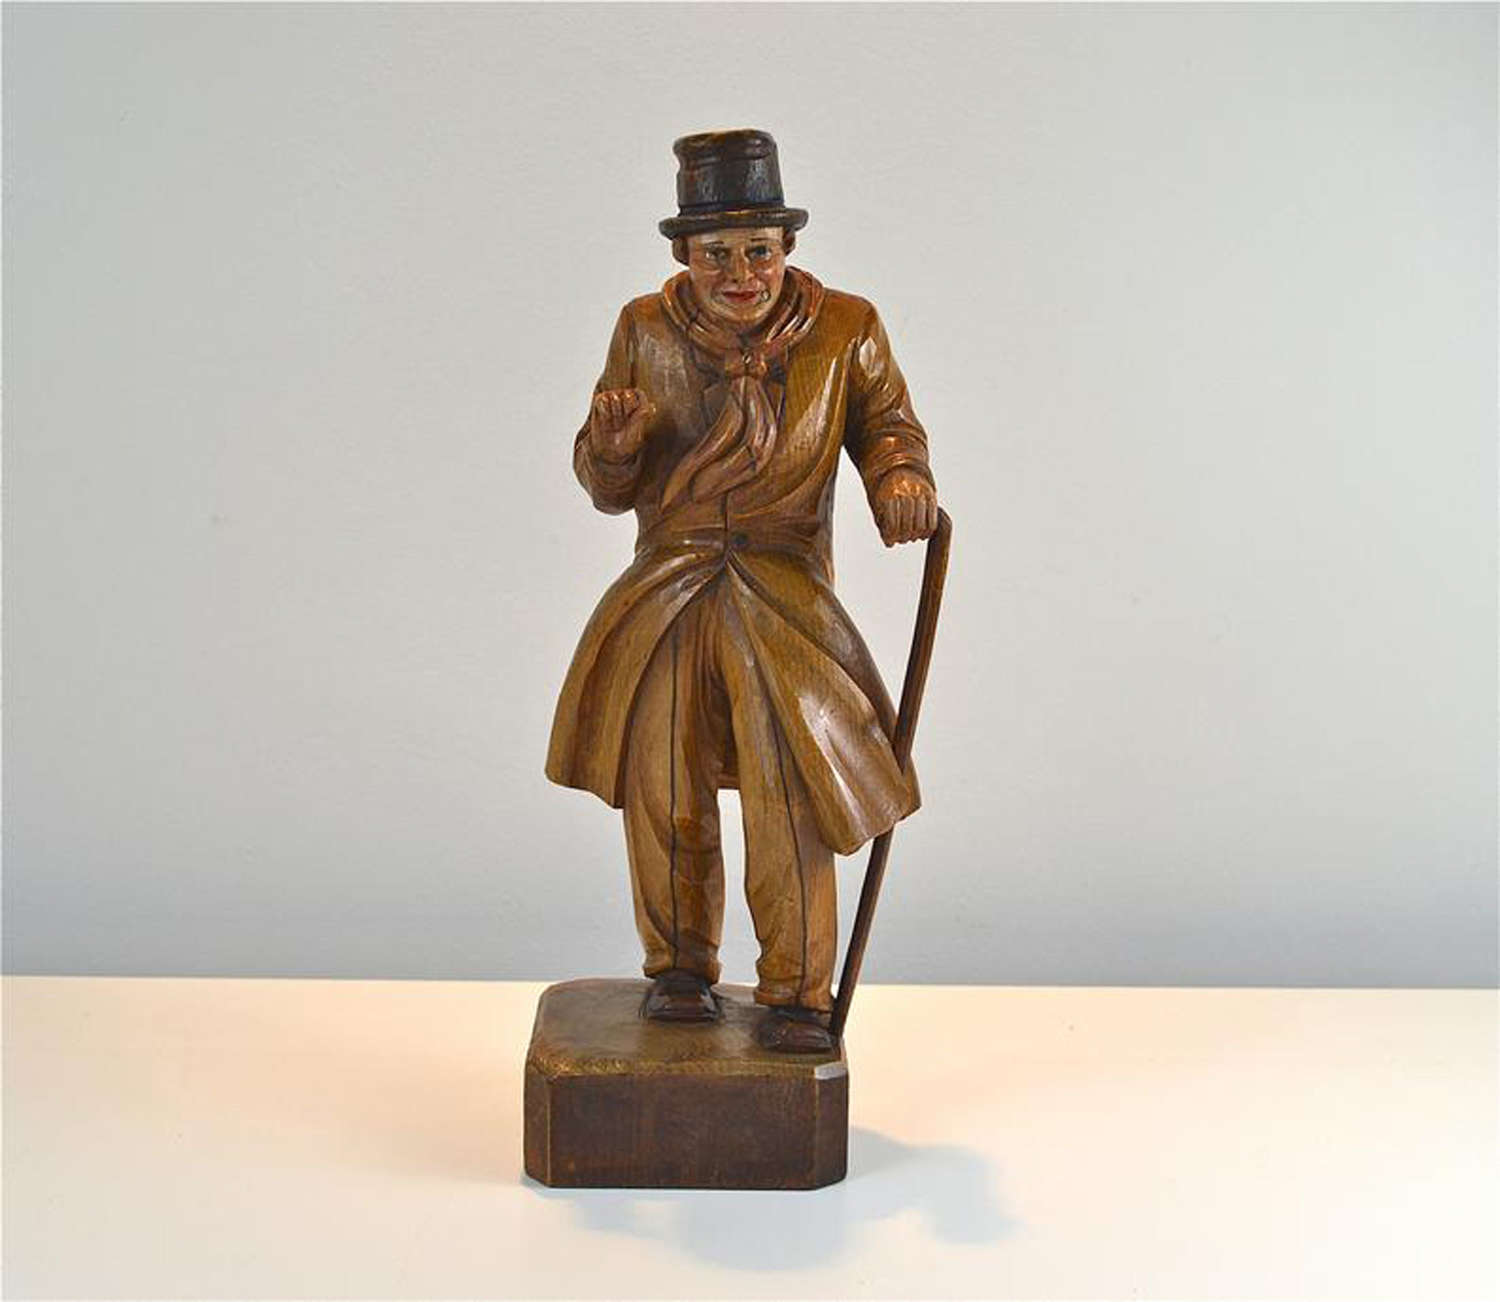 Antique carved wooden figure of a well dressed gentleman